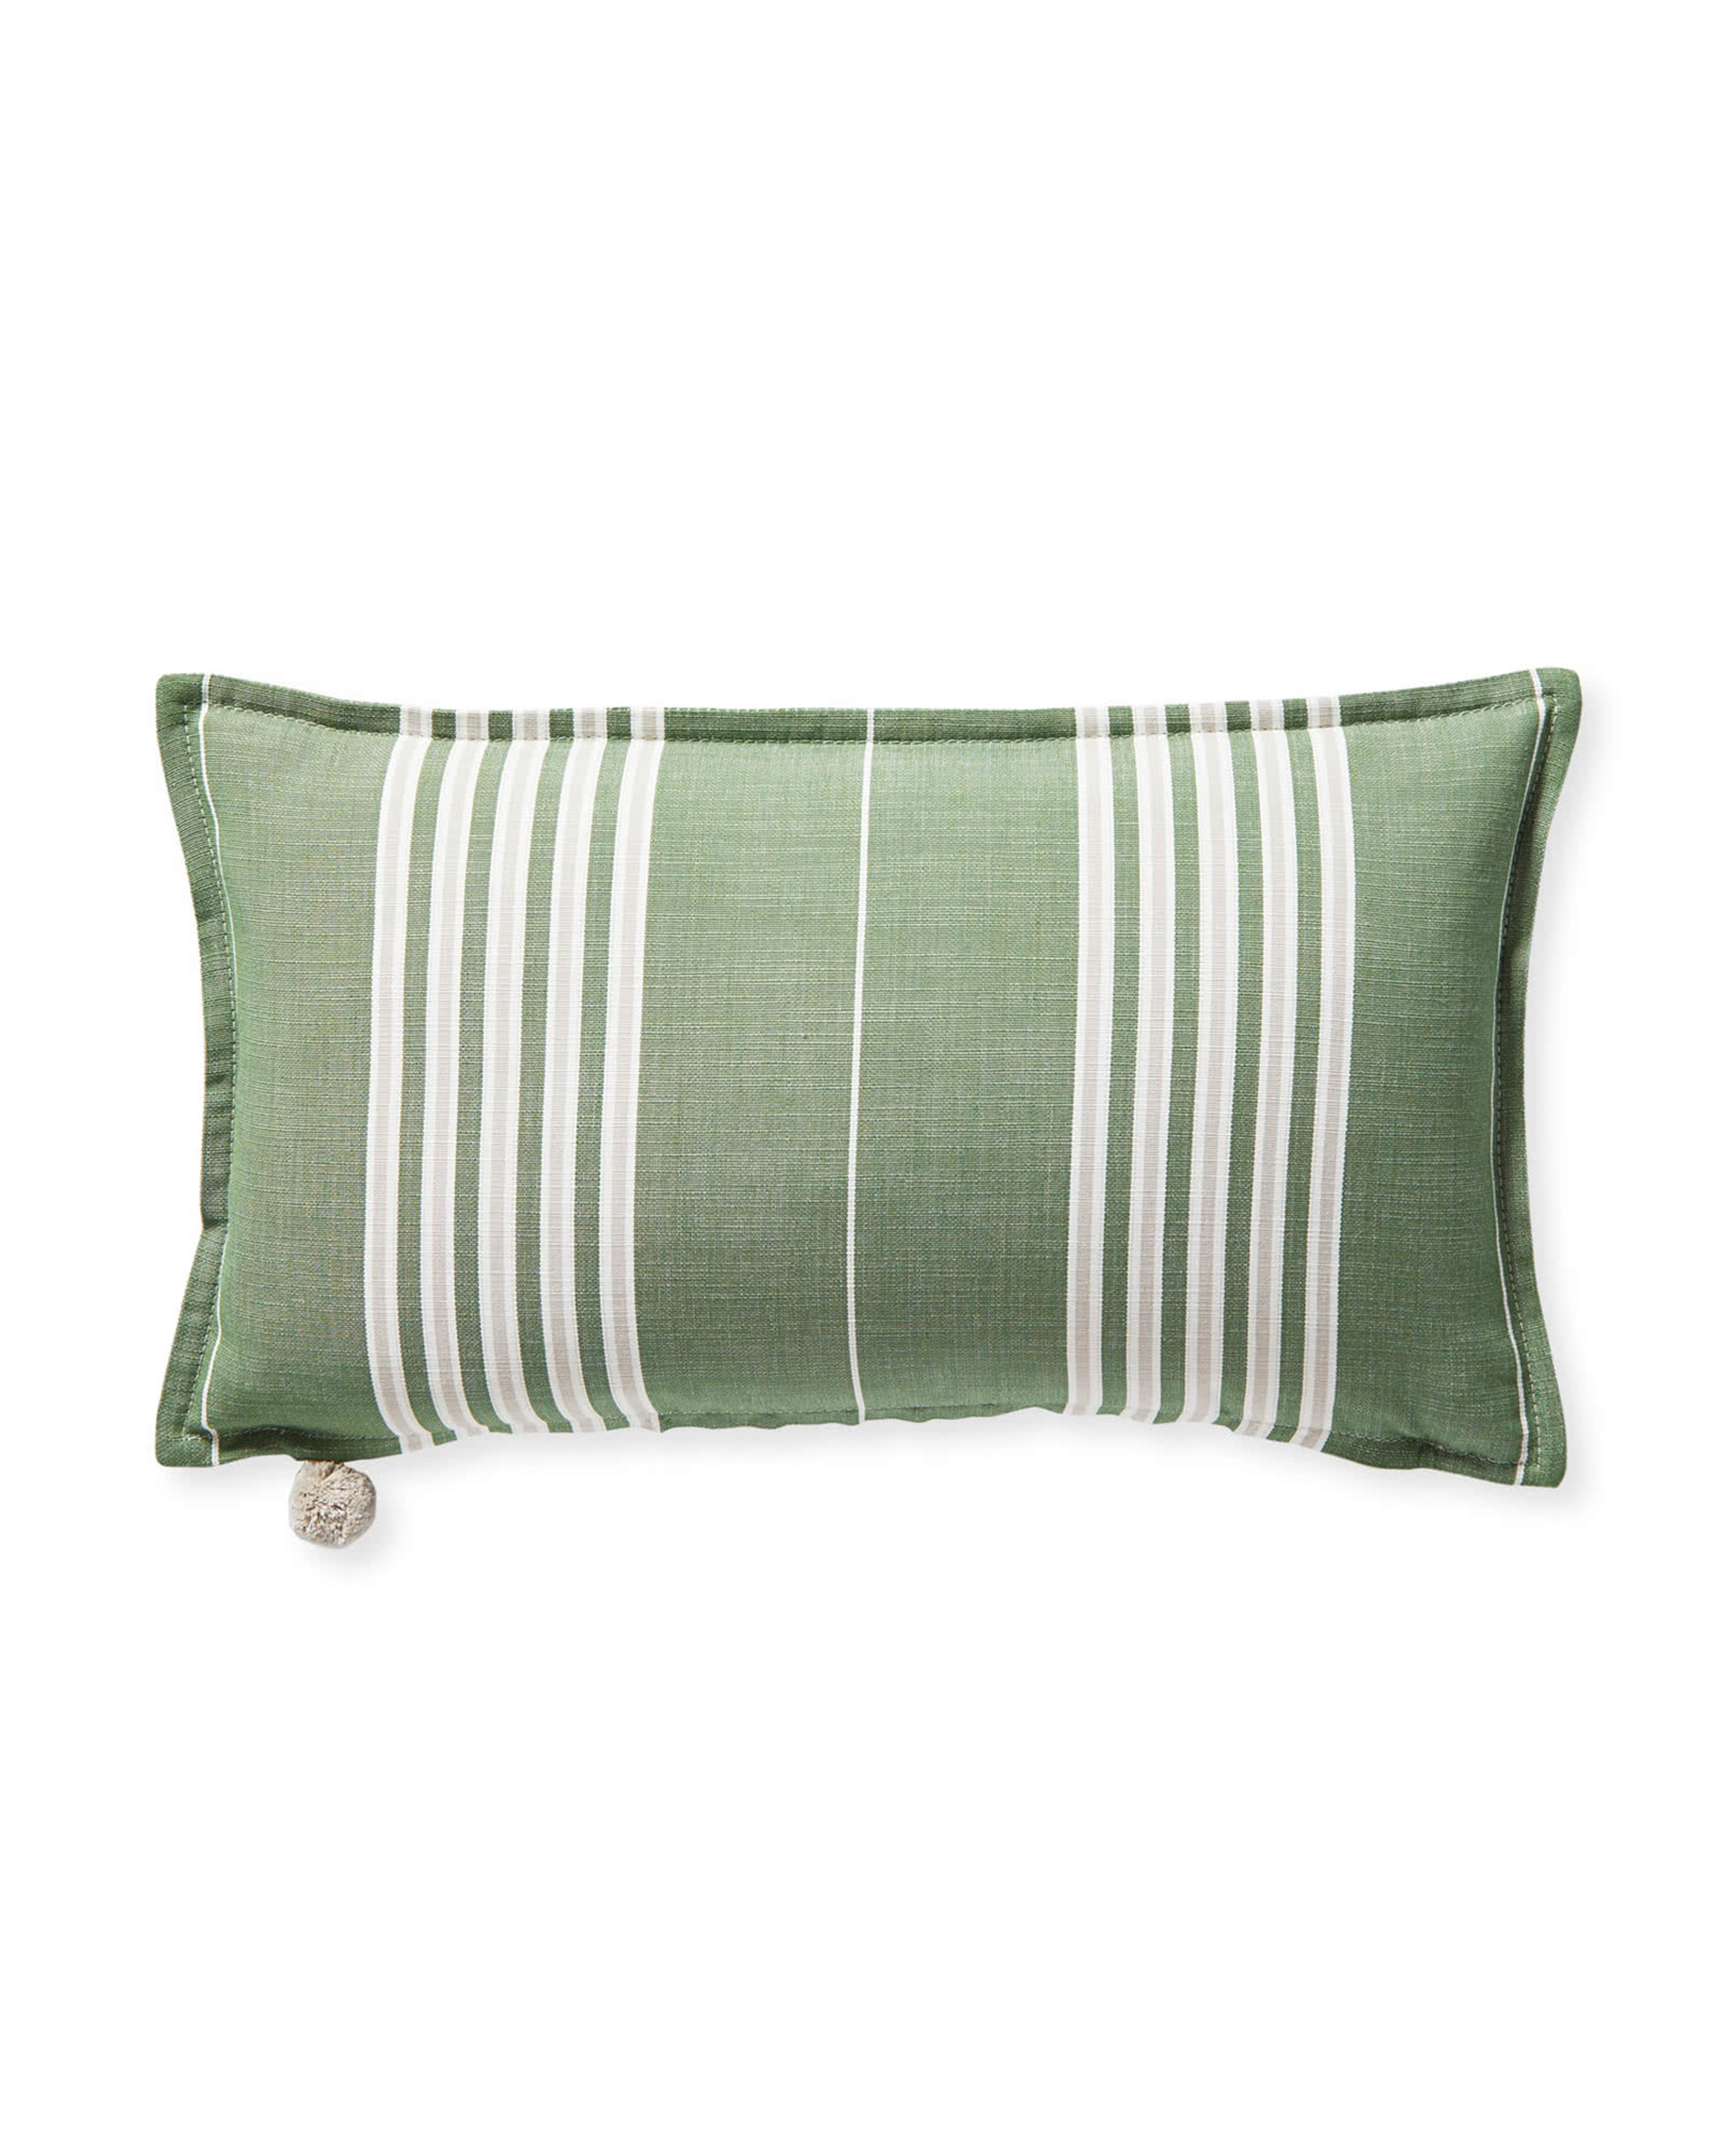 Perennials® Lake Stripe Pillow Cover, 12" x 21" - Serena and Lily